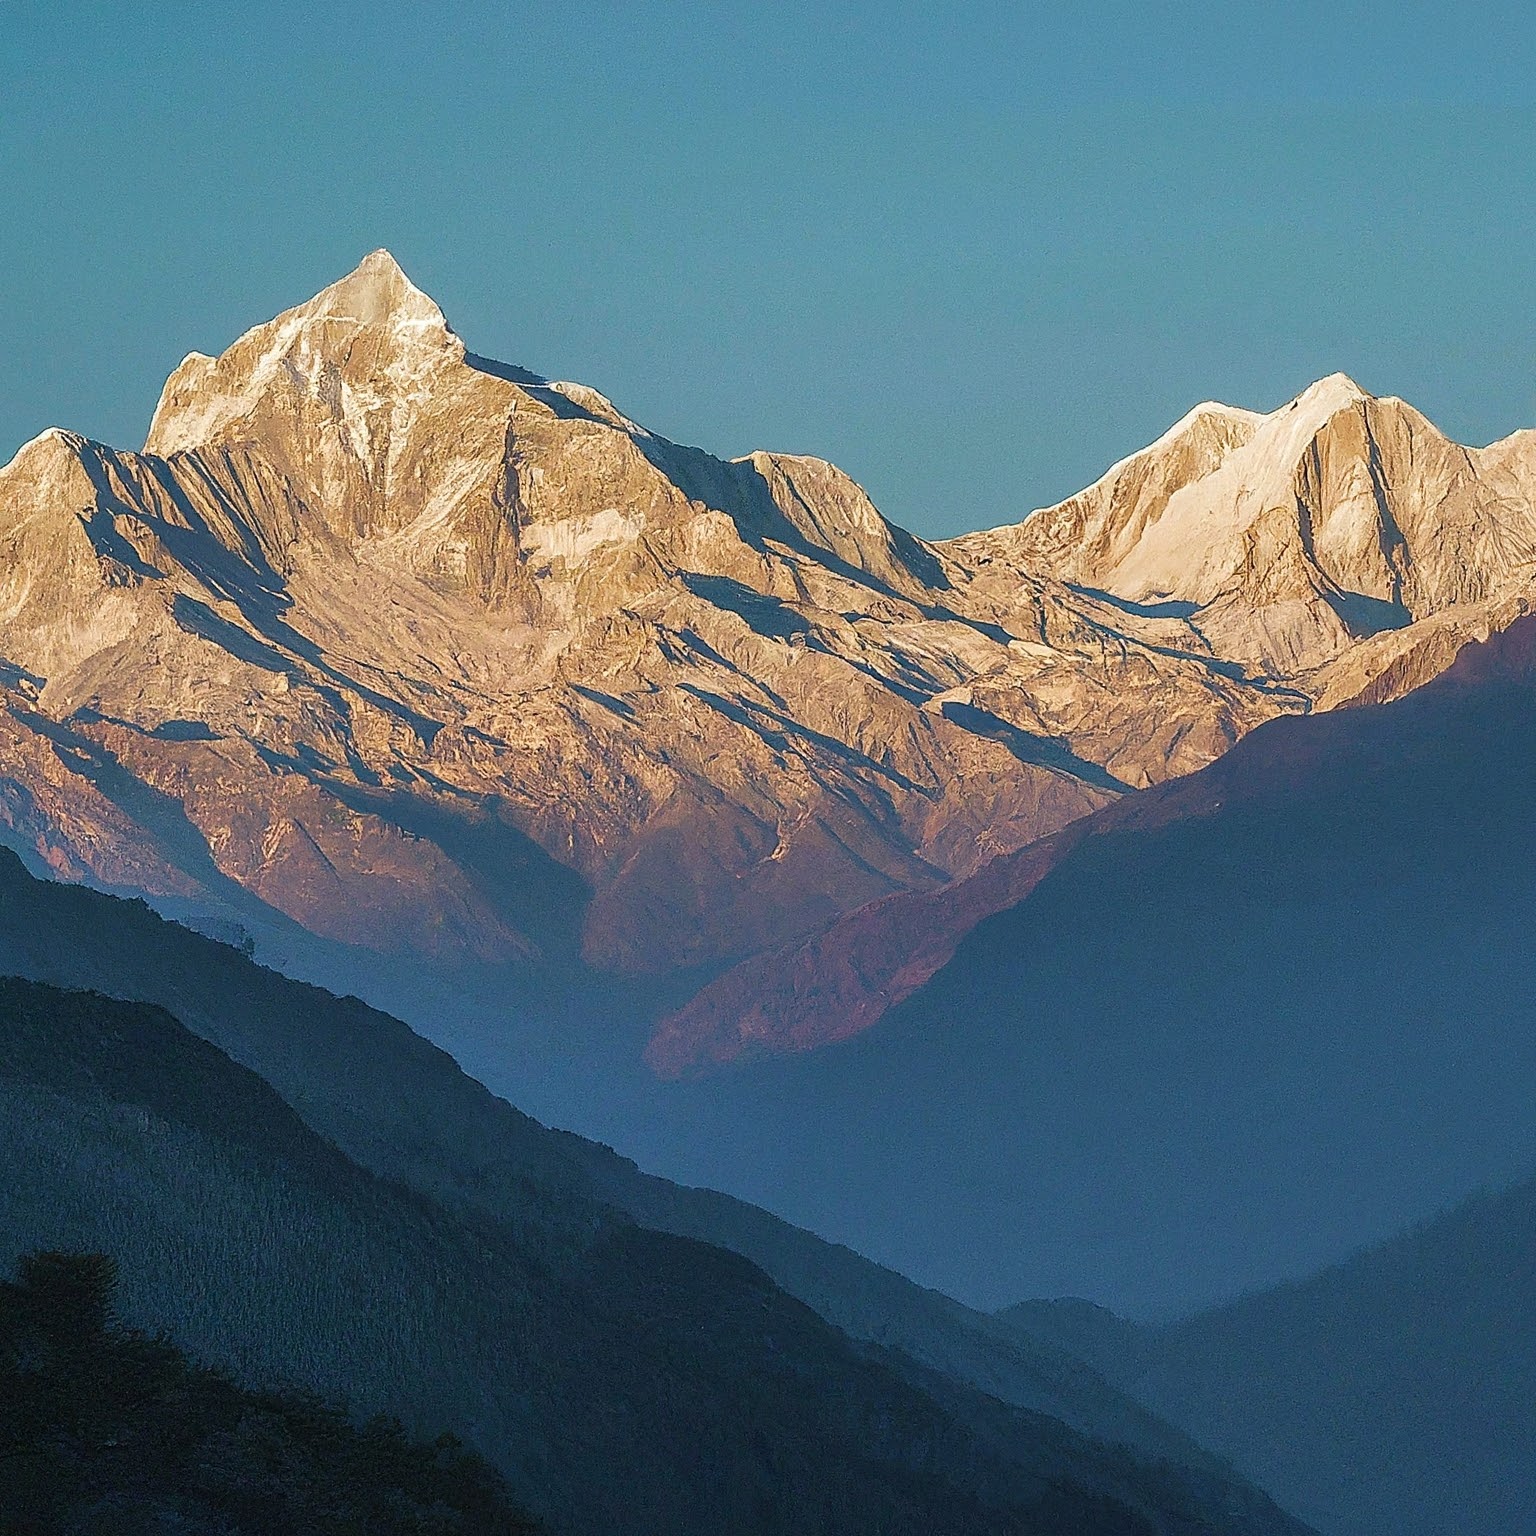 The Himalayas: More Than Just Mountains – A Journey Through Wonder